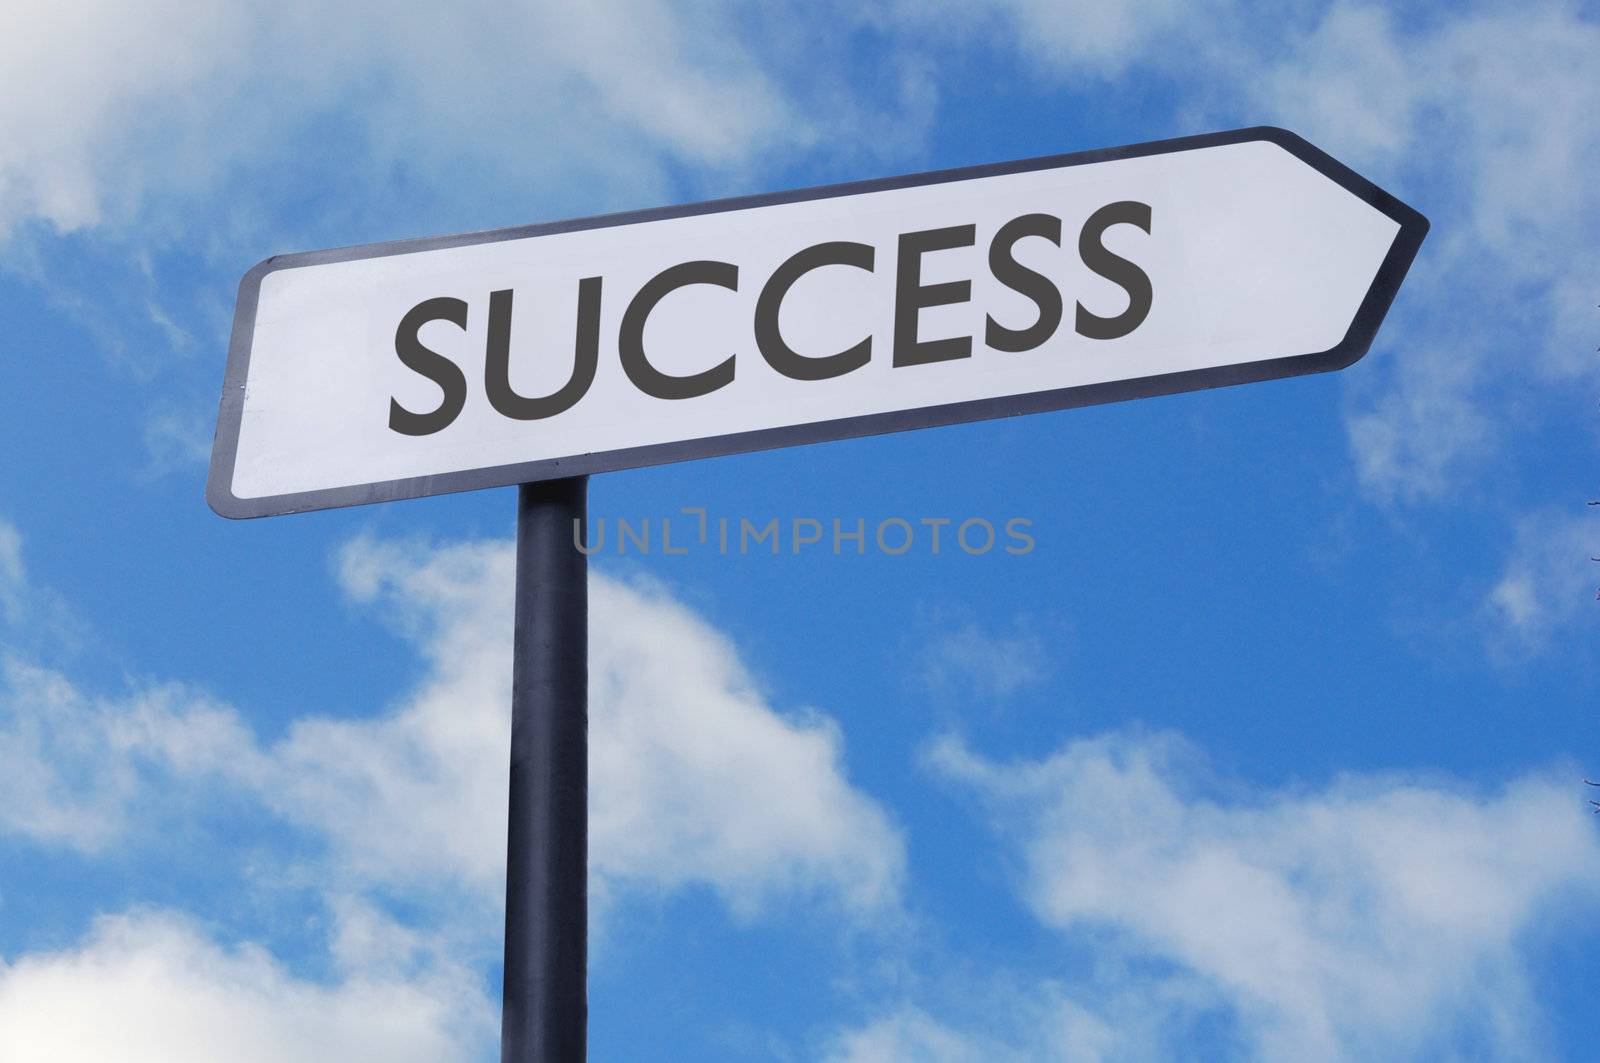 Success street sign with blue sky